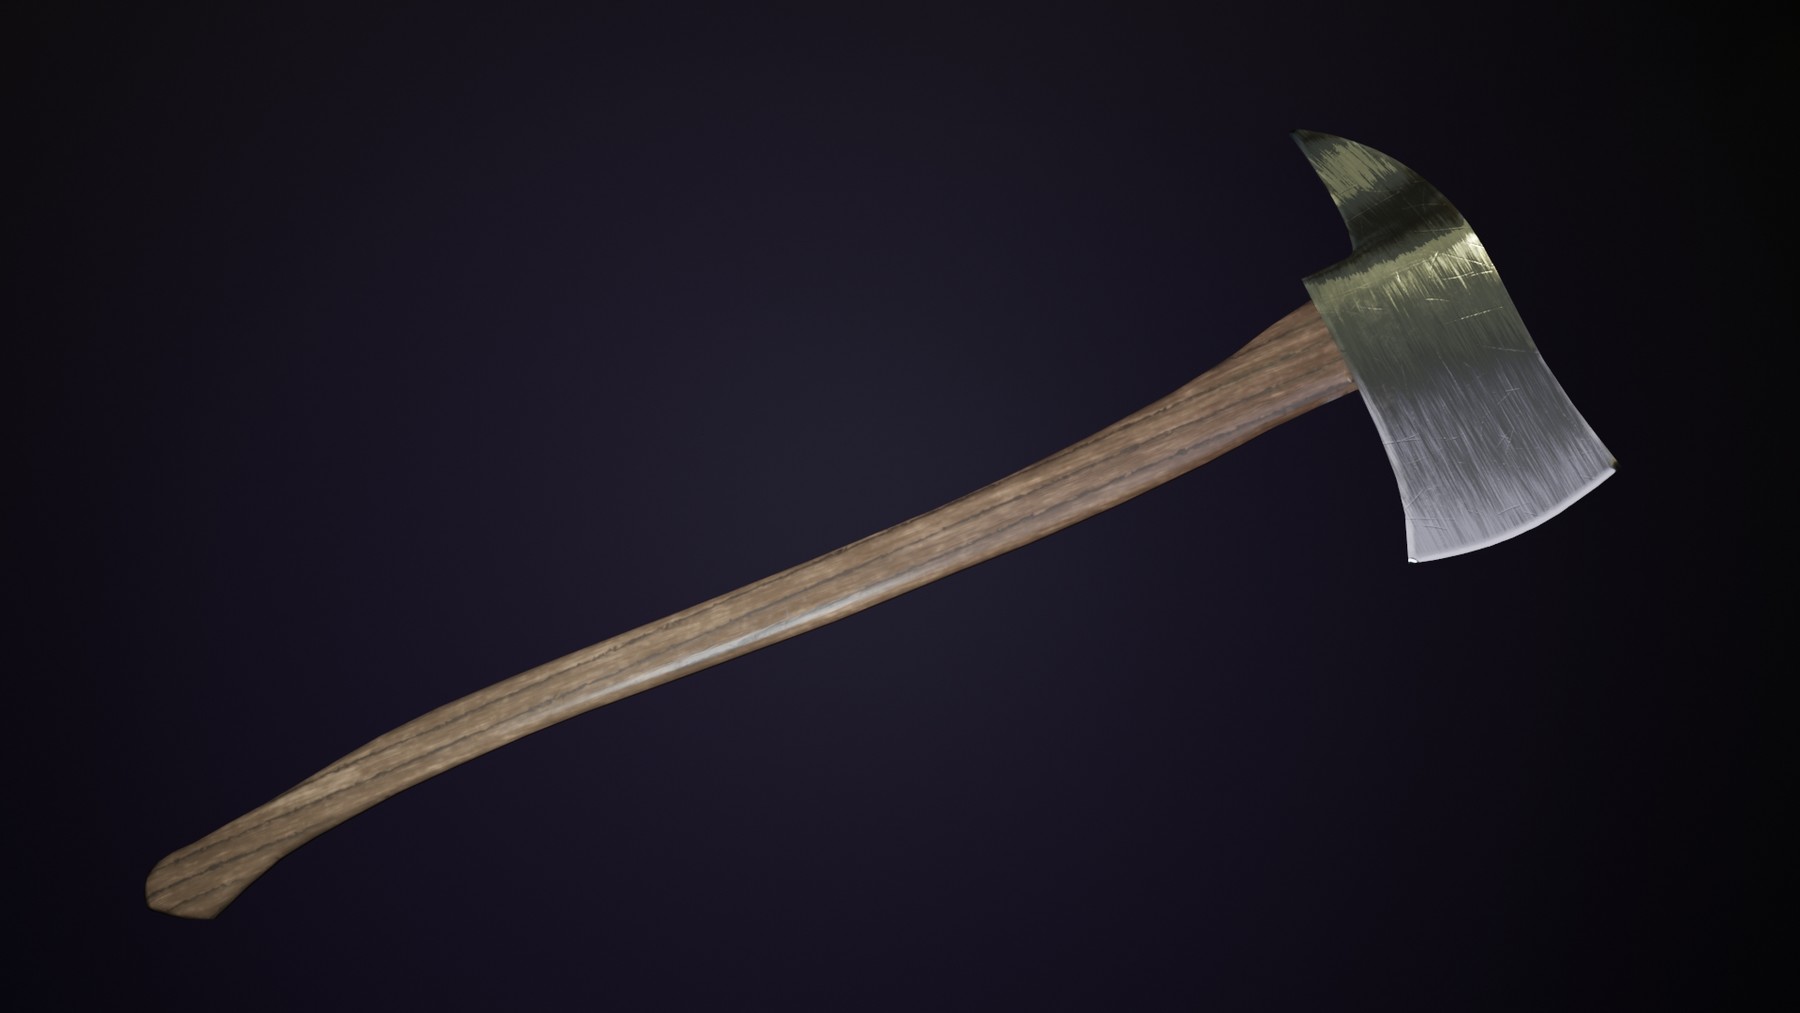 ArtStation - Melee Weapons Pack - 2k 4k Pbr - Vr, Unity and Unreal ready | Game Assets